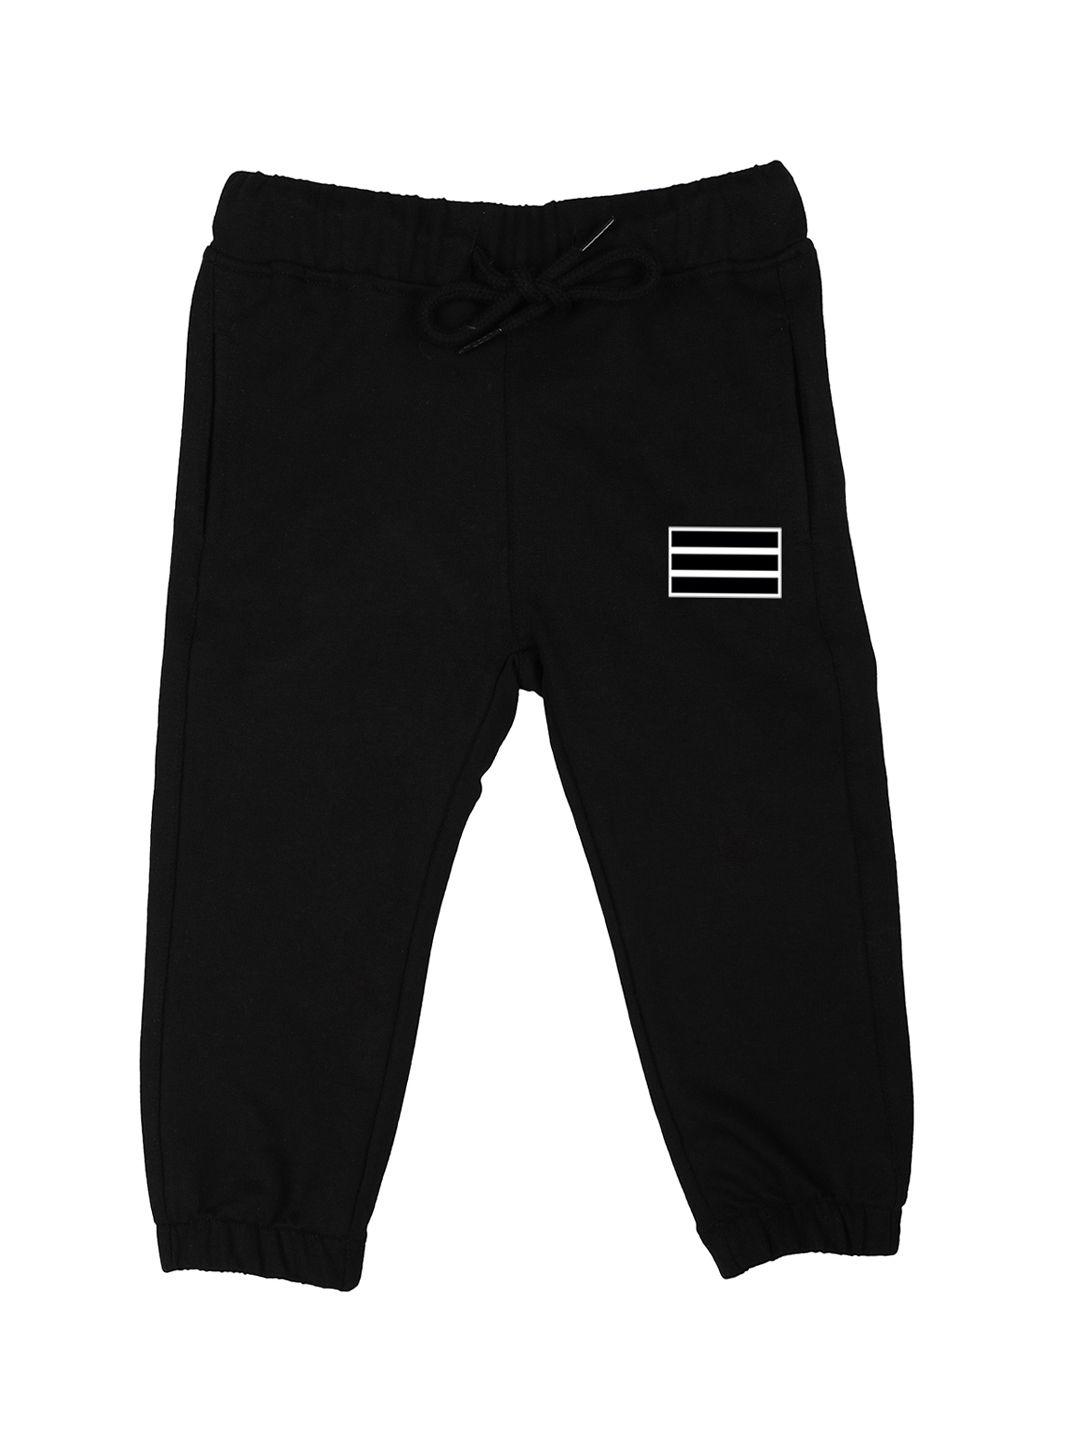 wear your mind unisex black solid straight fit joggers